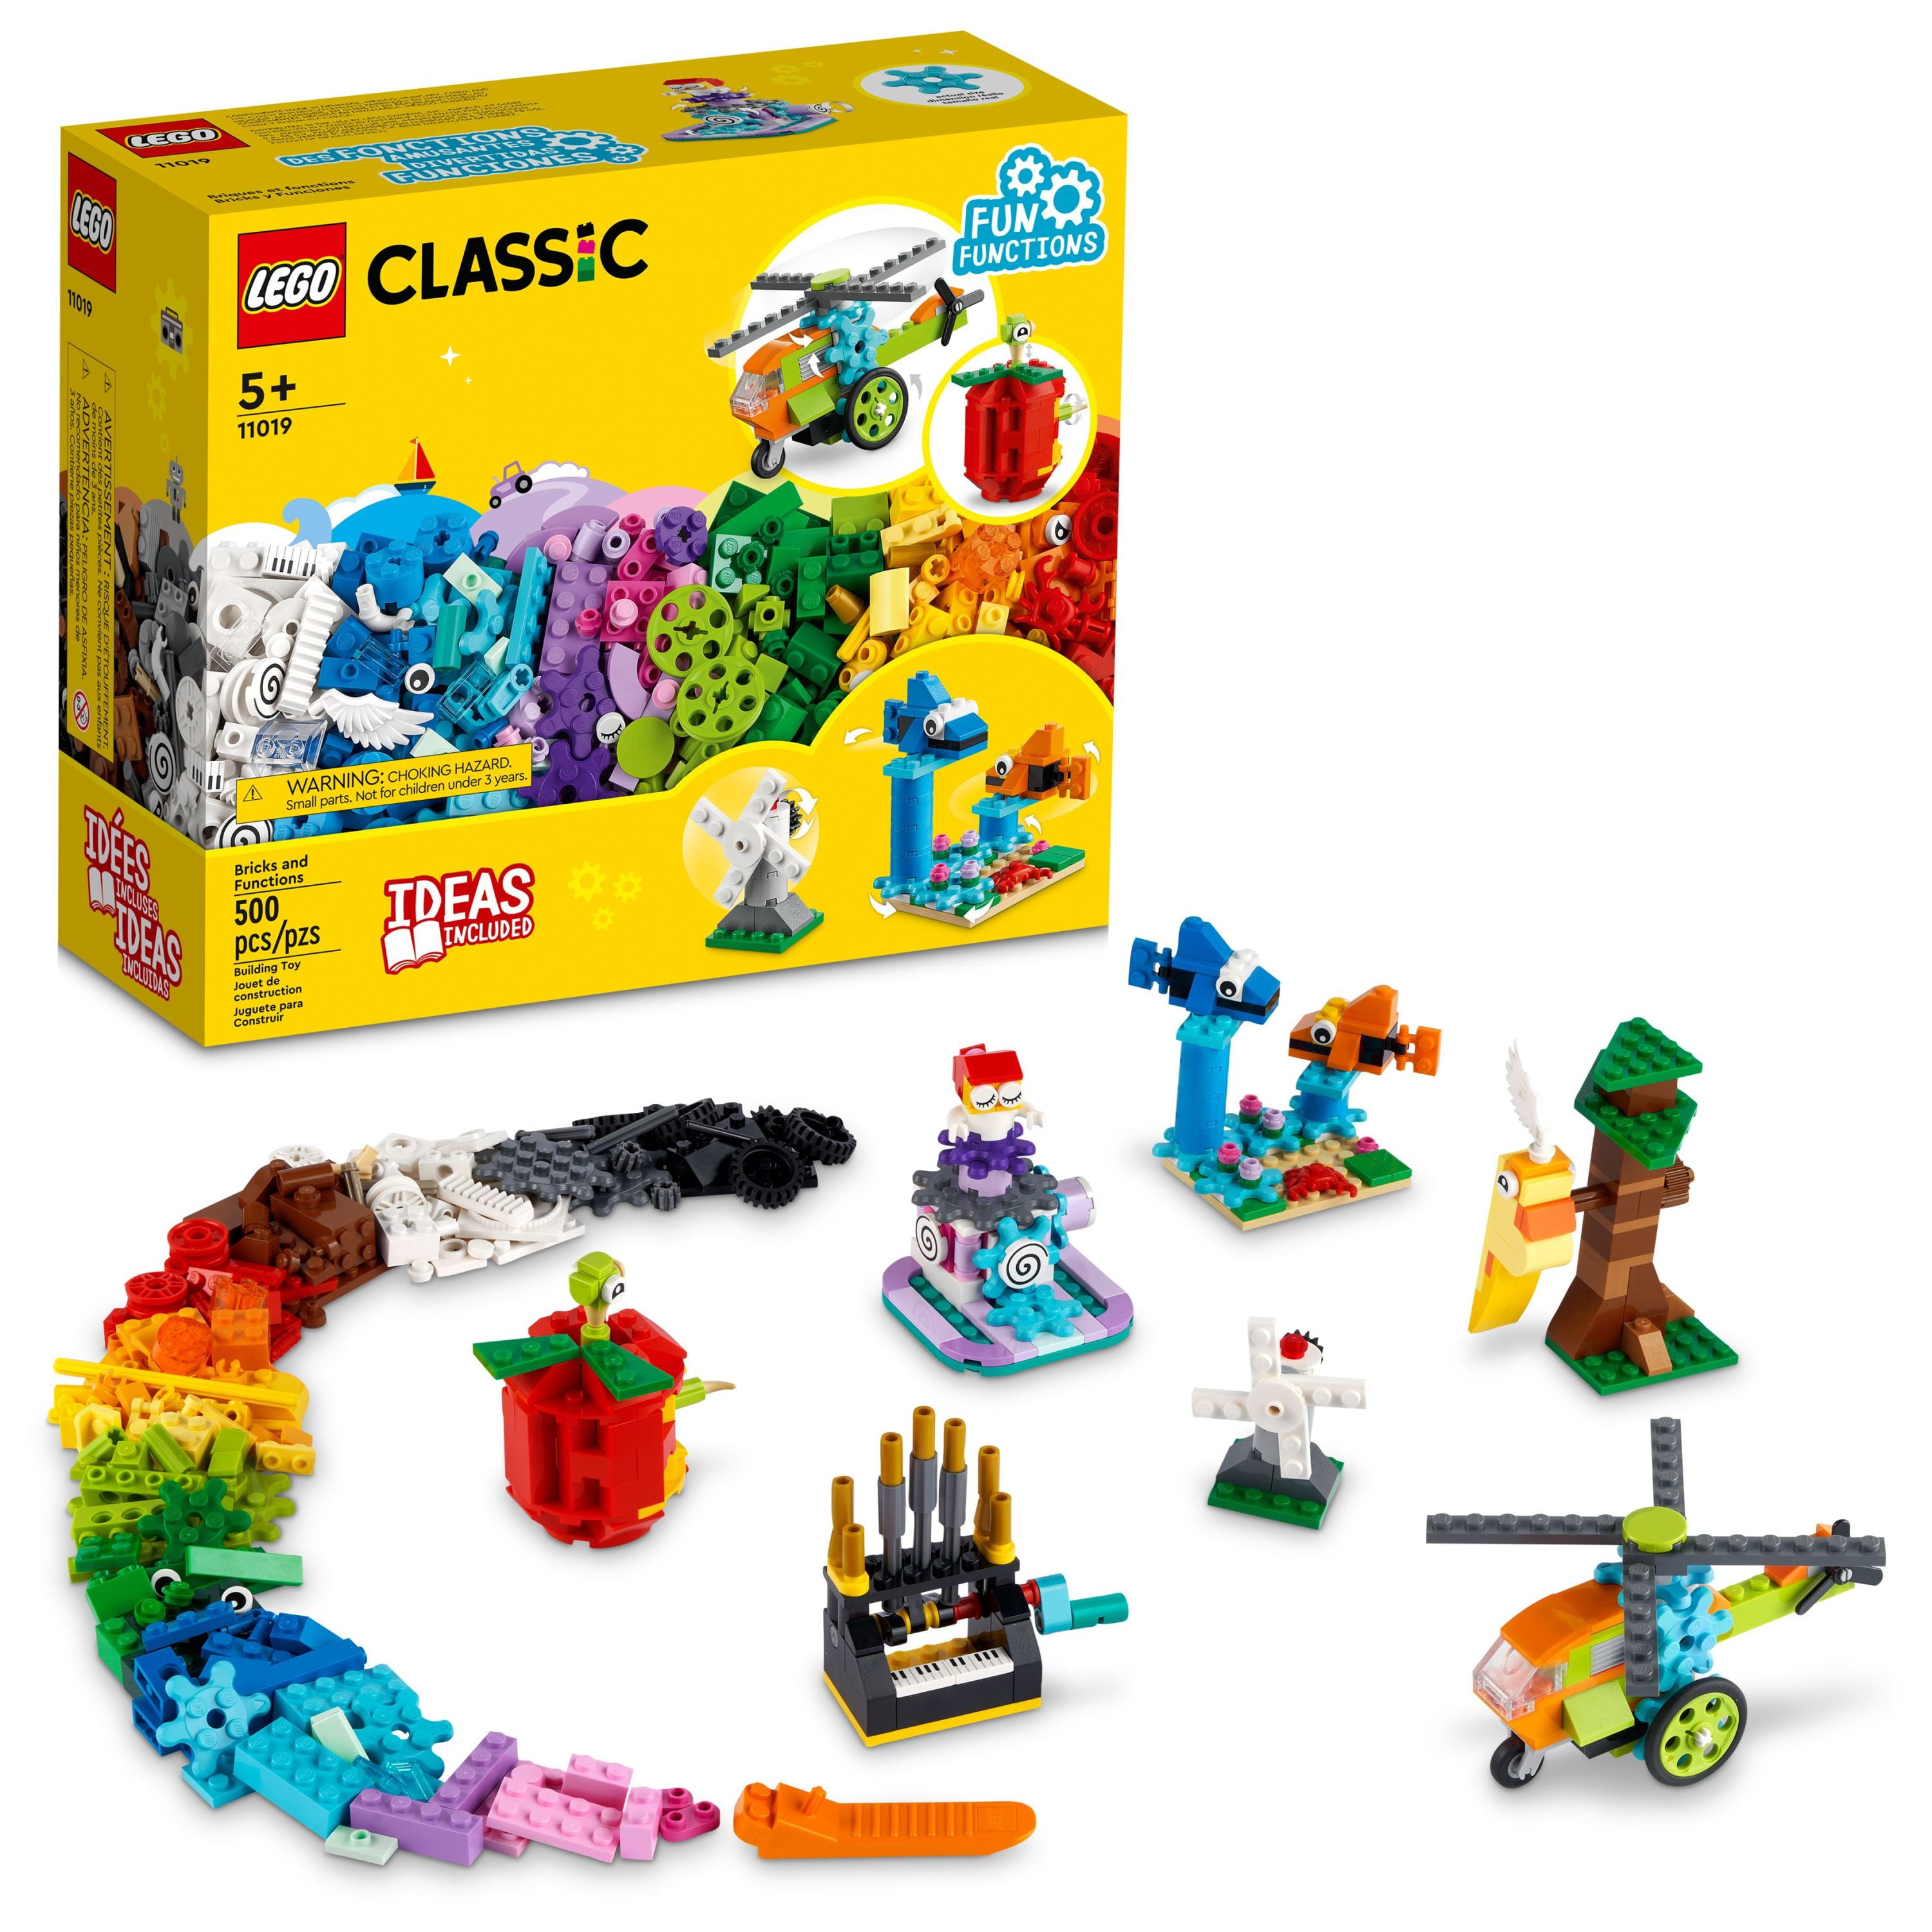 LEGO Classic Bricks and Functions 11019 Kids' Kit with 7 Buildable Toys Kids Aged 5 and Up Pieces) -